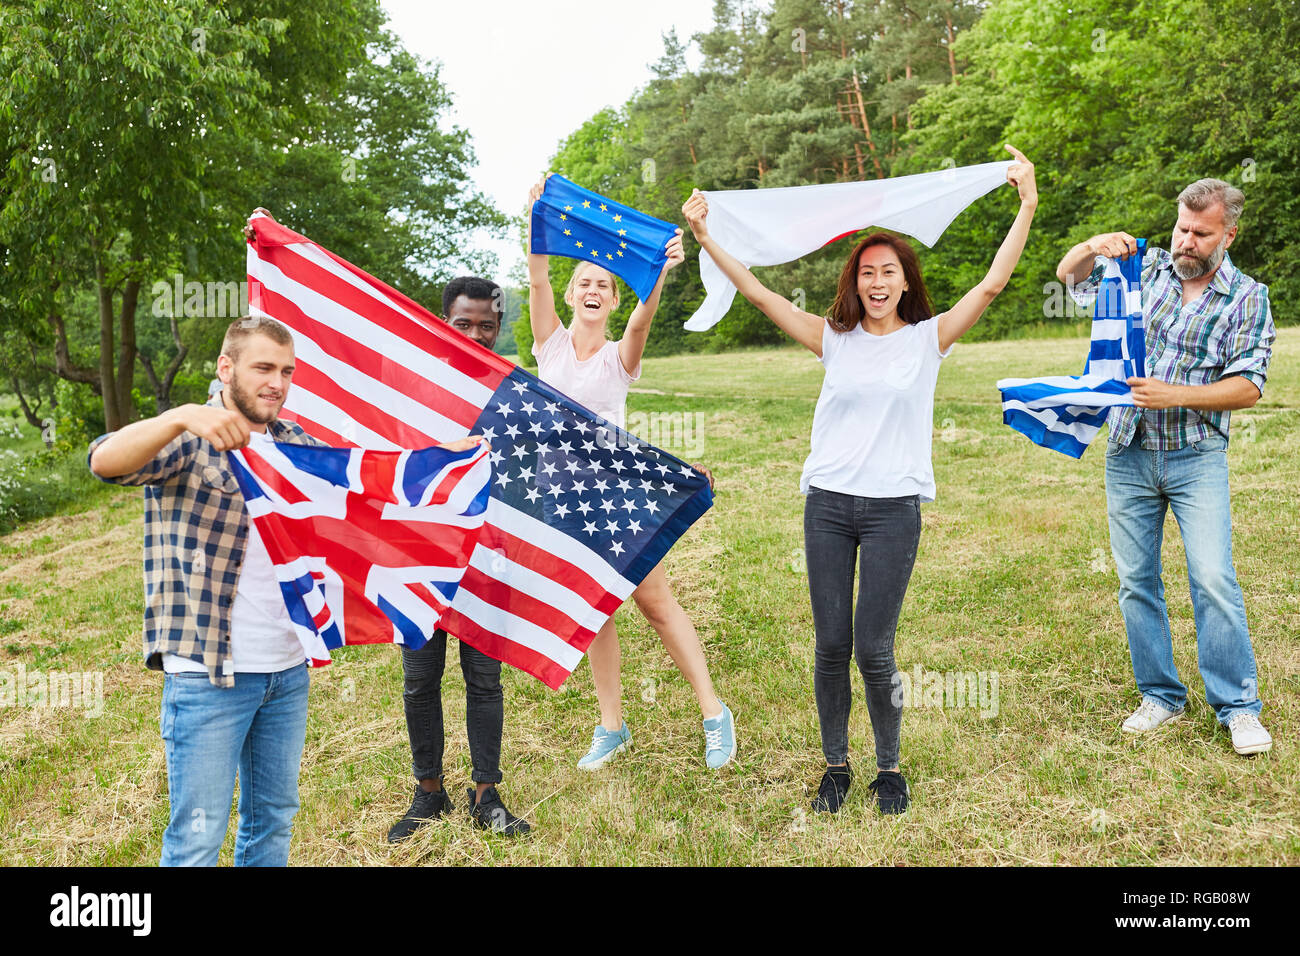 Group of students in a park motion with different national flags Stock Photo